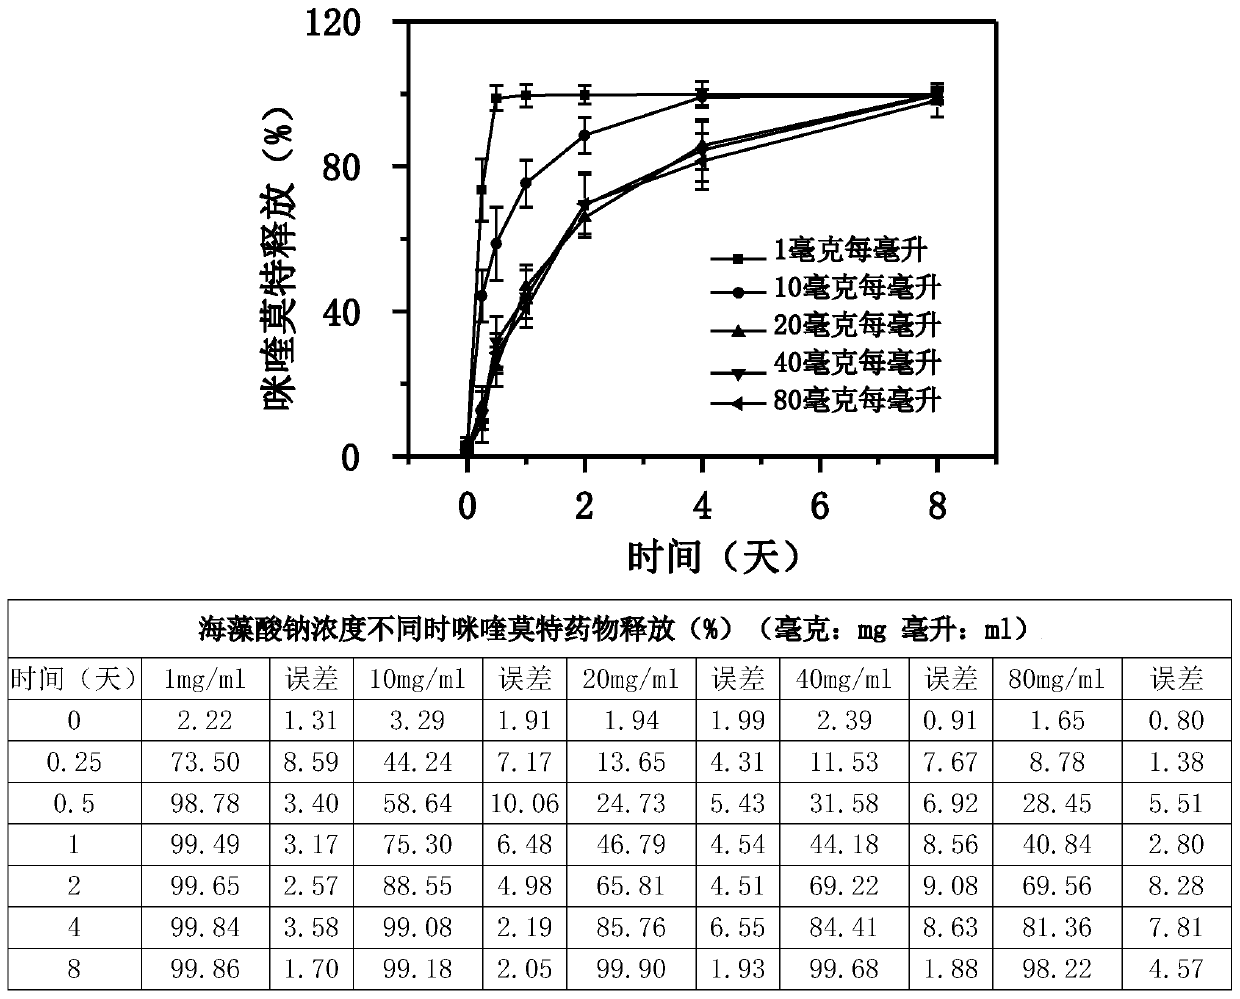 Immunochemotherapy pharmaceutical composition and preparation method therefor